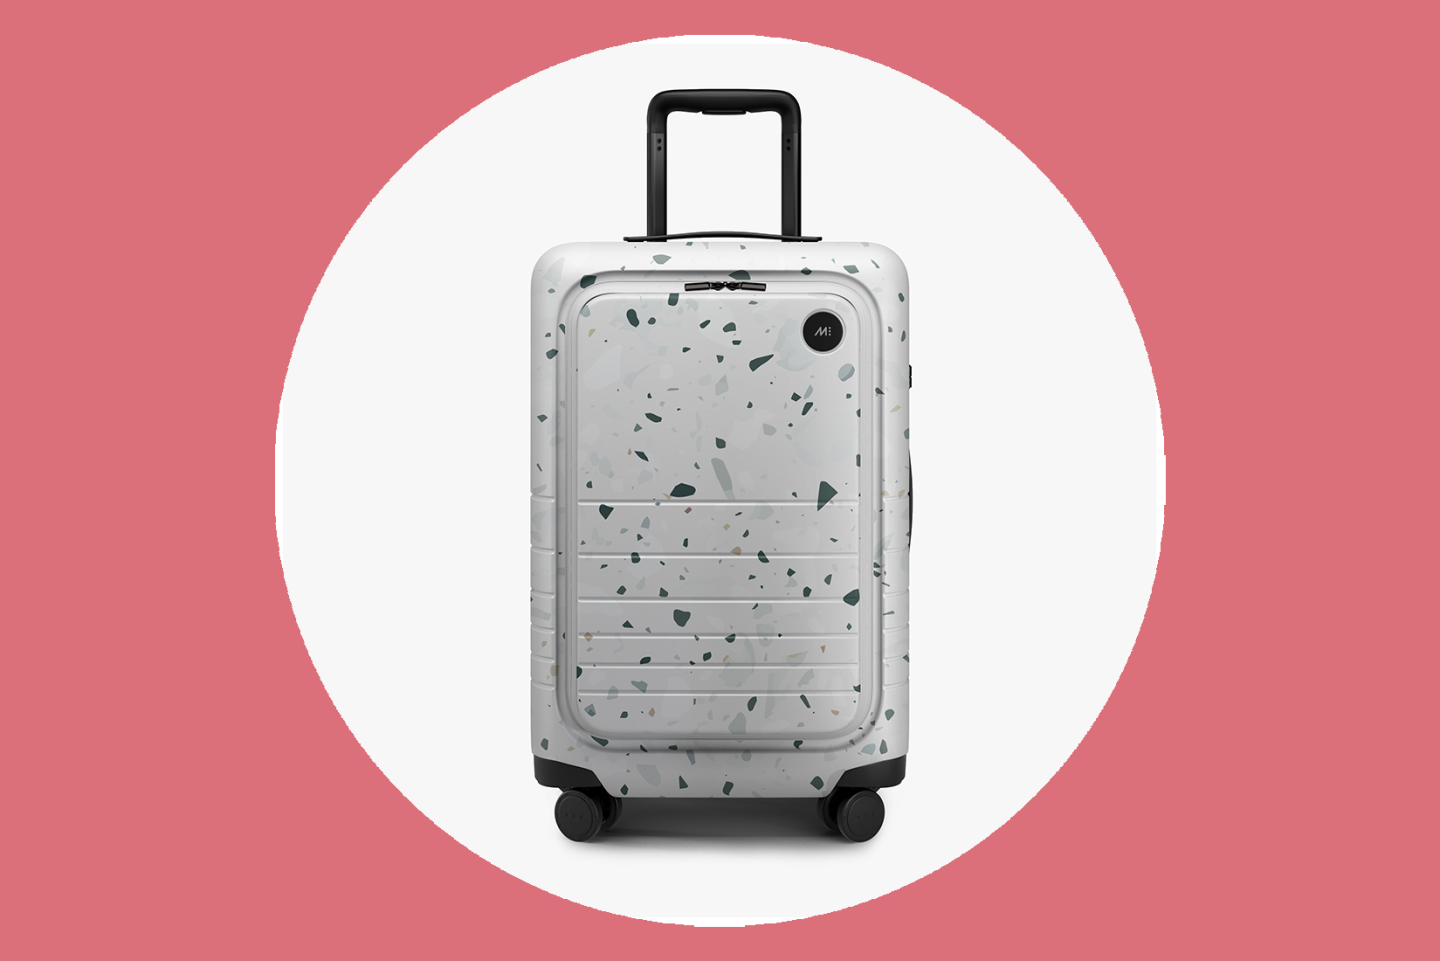 <a>Instead of carrying your laptop's weight on your shoulders, pop it into the exterior pocket on this stylish Monos suitcase.</a>